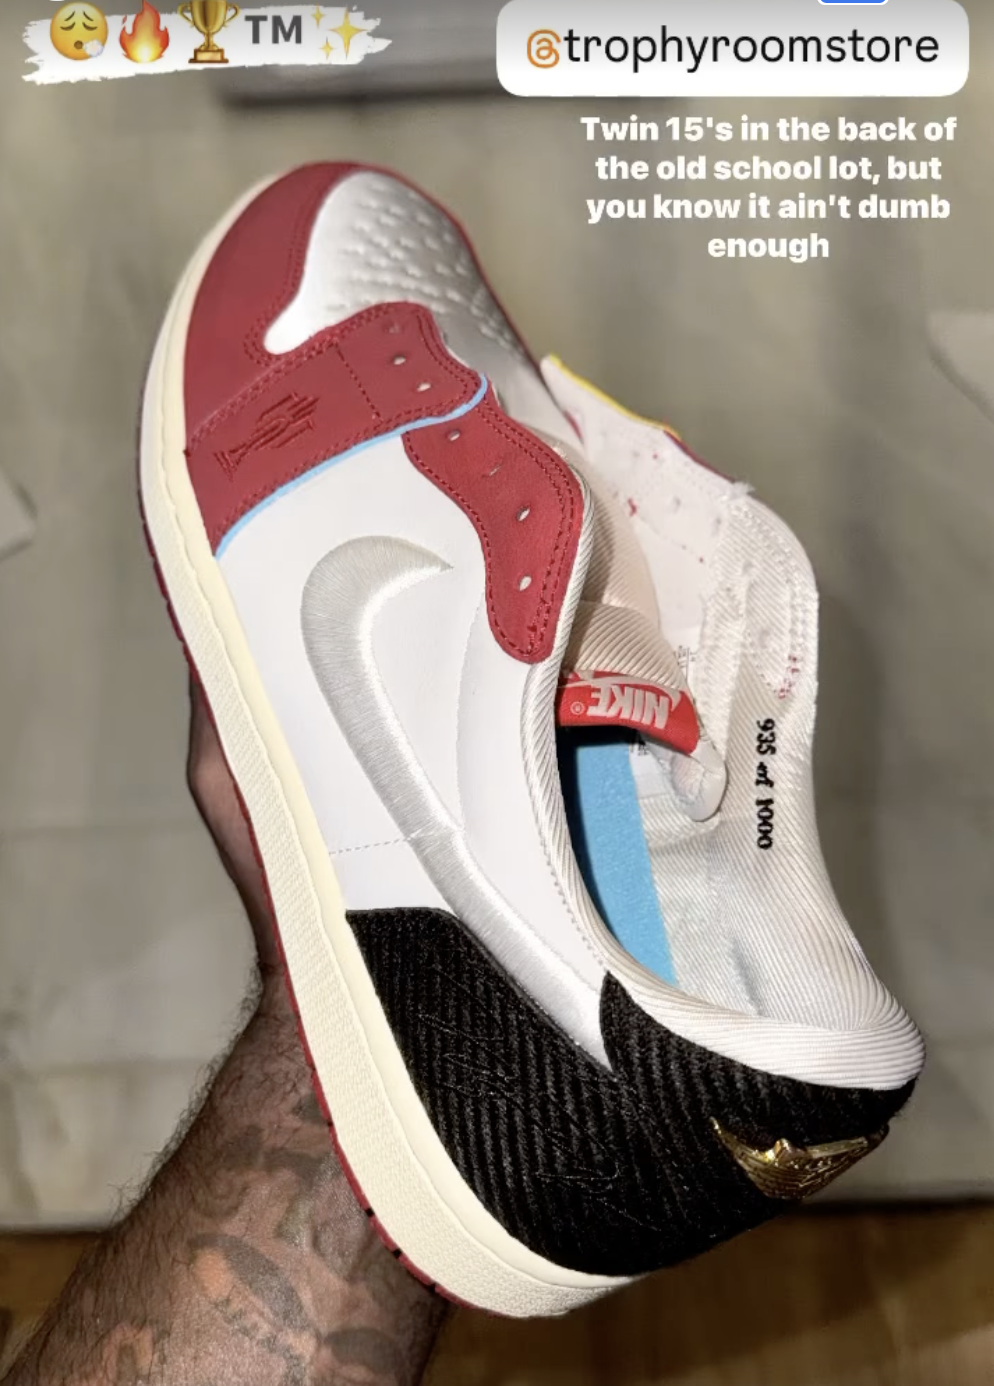 A hand holds a stylish sneaker with red, white, and black details. The @trophyroomstore Instagram username and text &quot;Twin 15&#x27;s in the back of the old school lot, but you know it ain&#x27;t dumb enough&quot; are visible